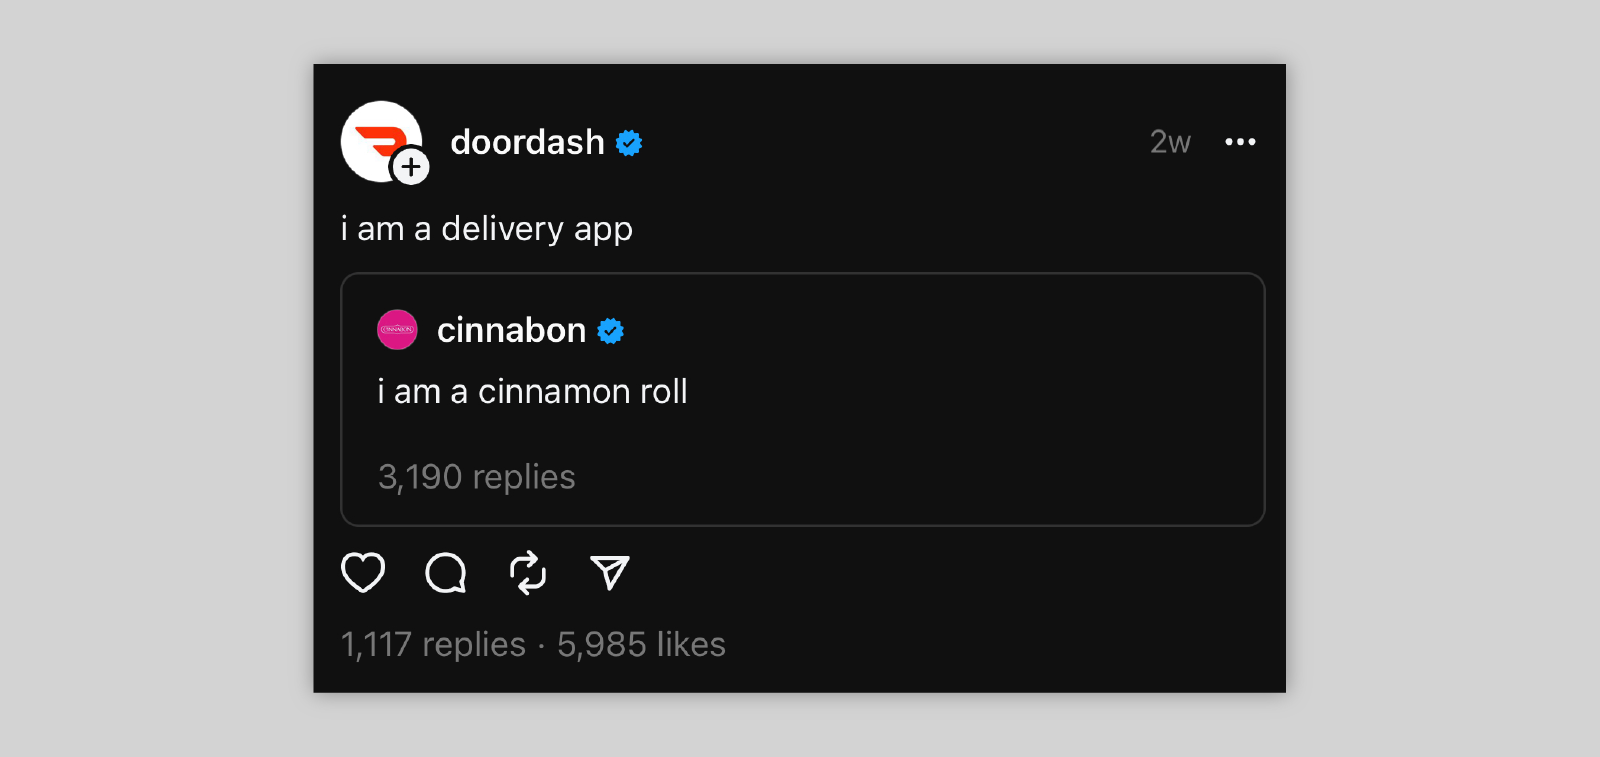 A post on threads by doordash "i am a delivery app"